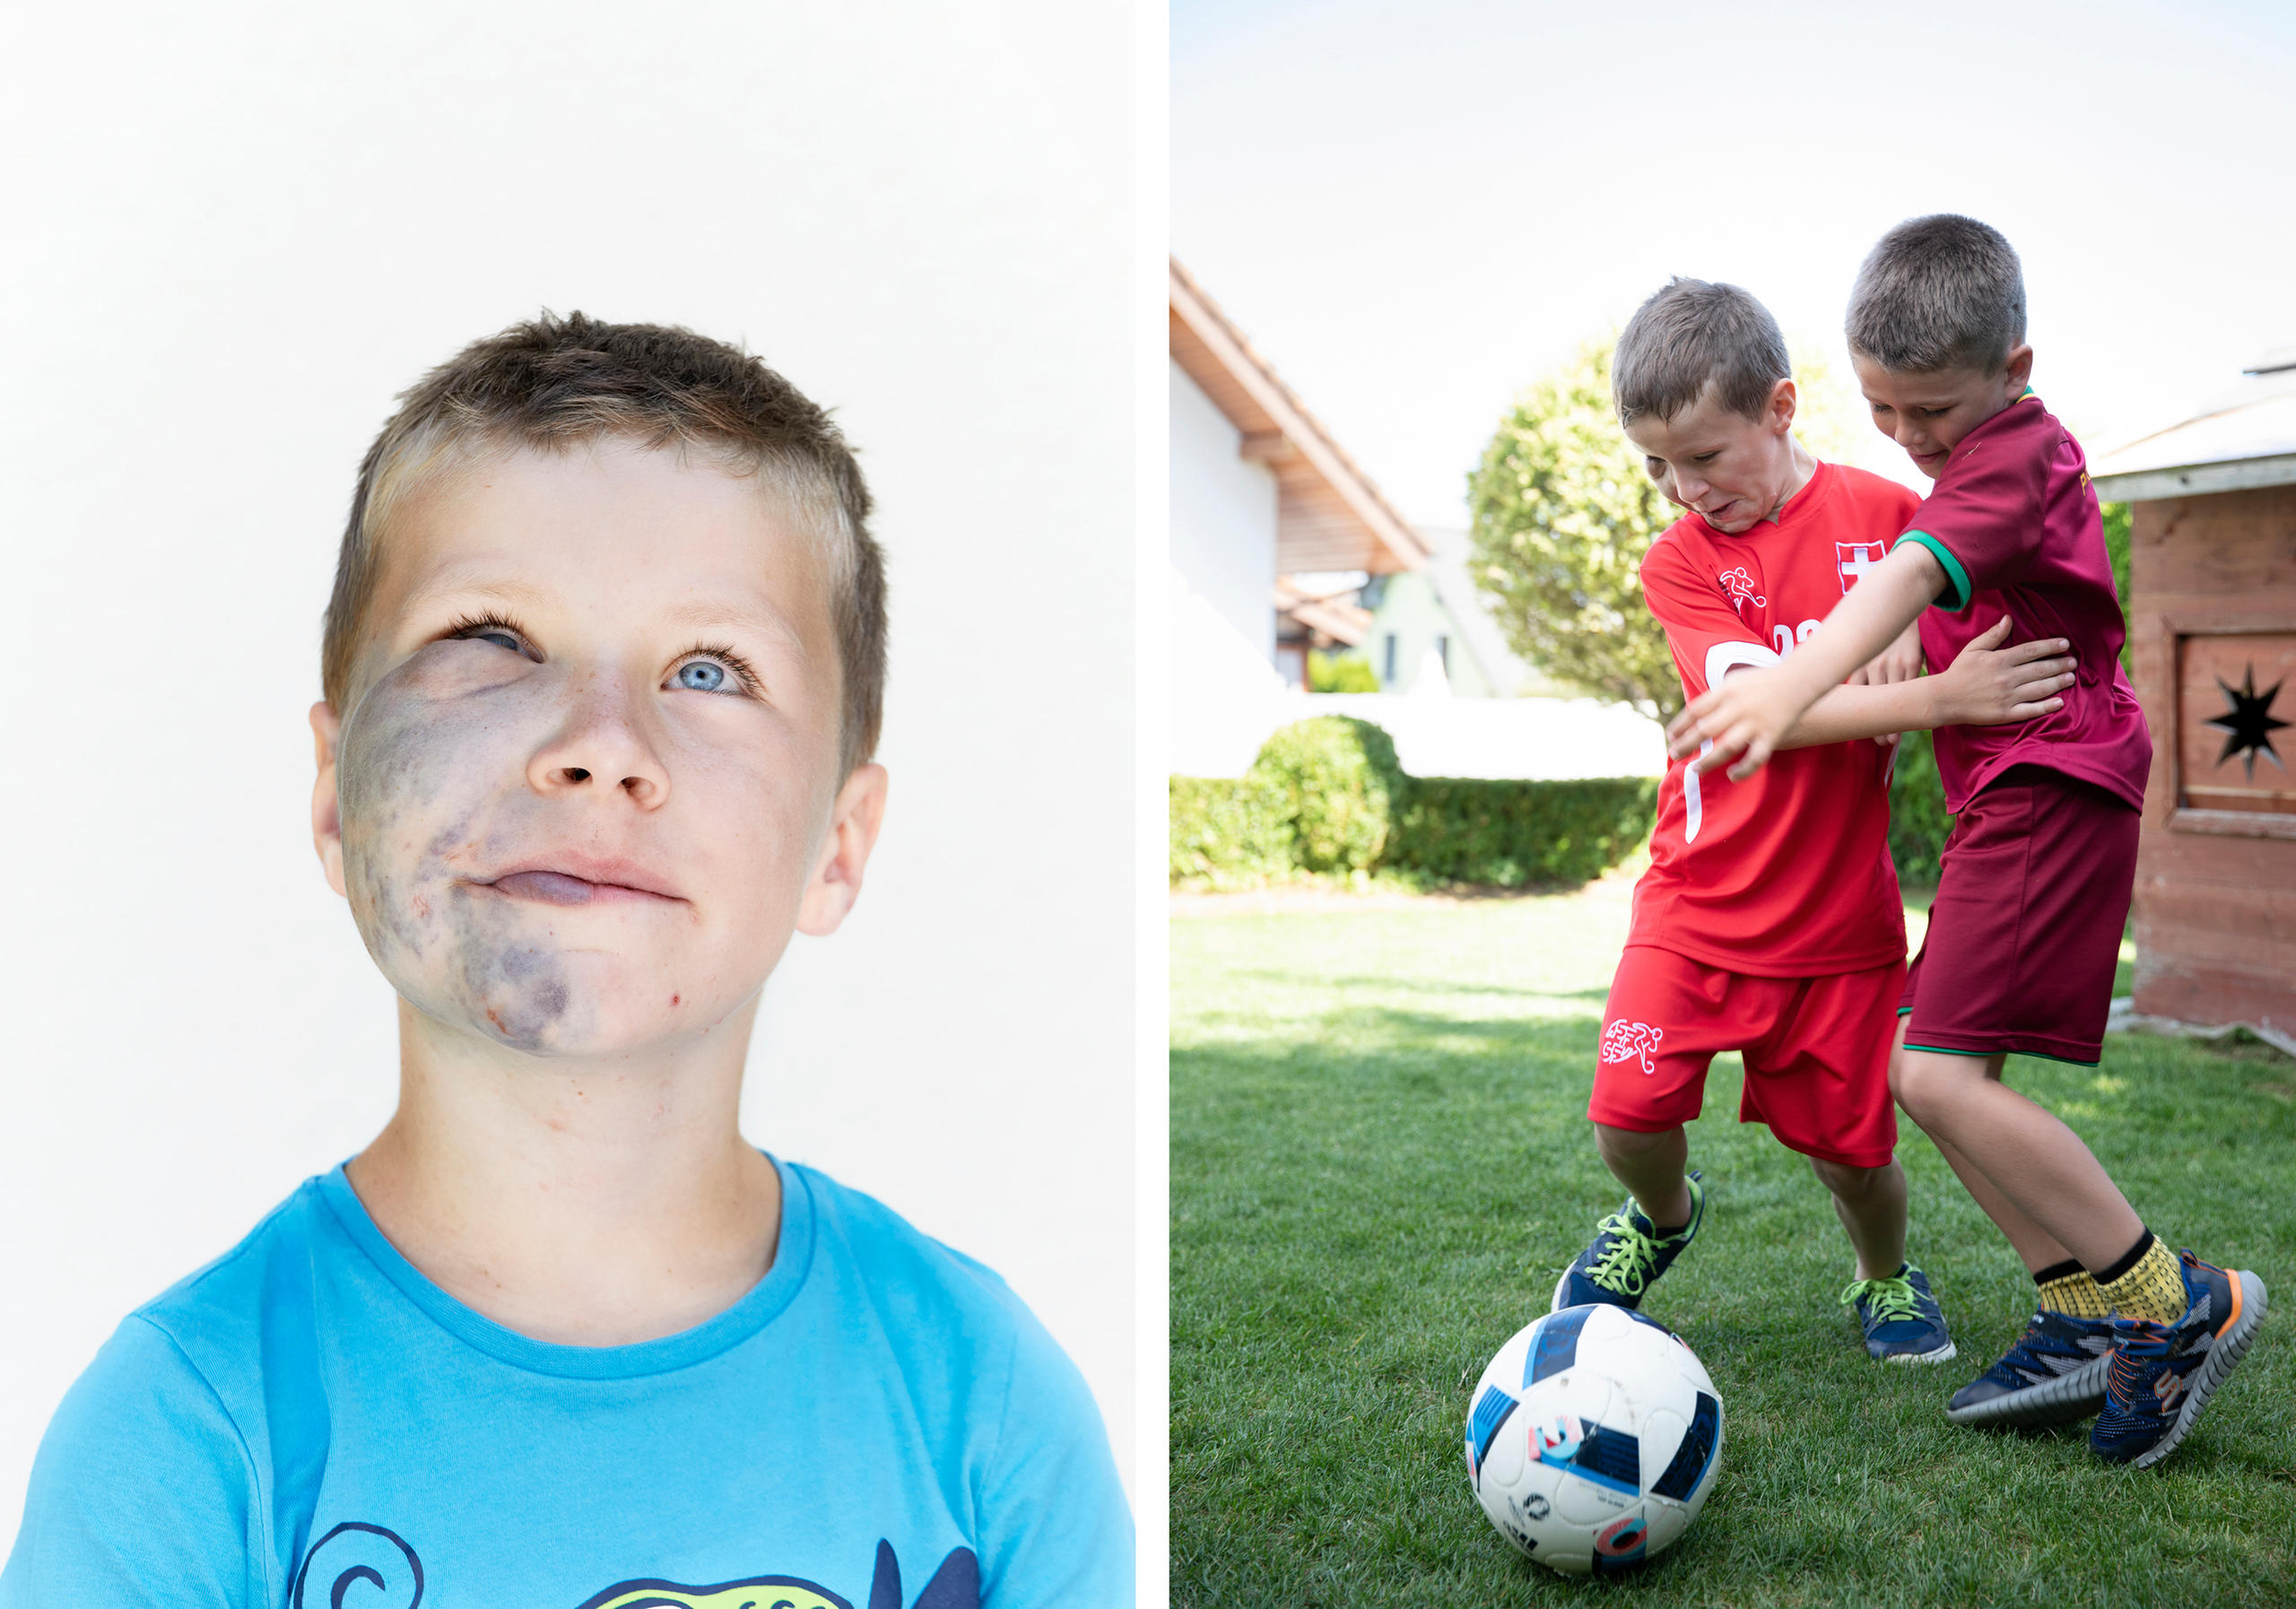 Pictures of a boy with severe skin lesions on his face